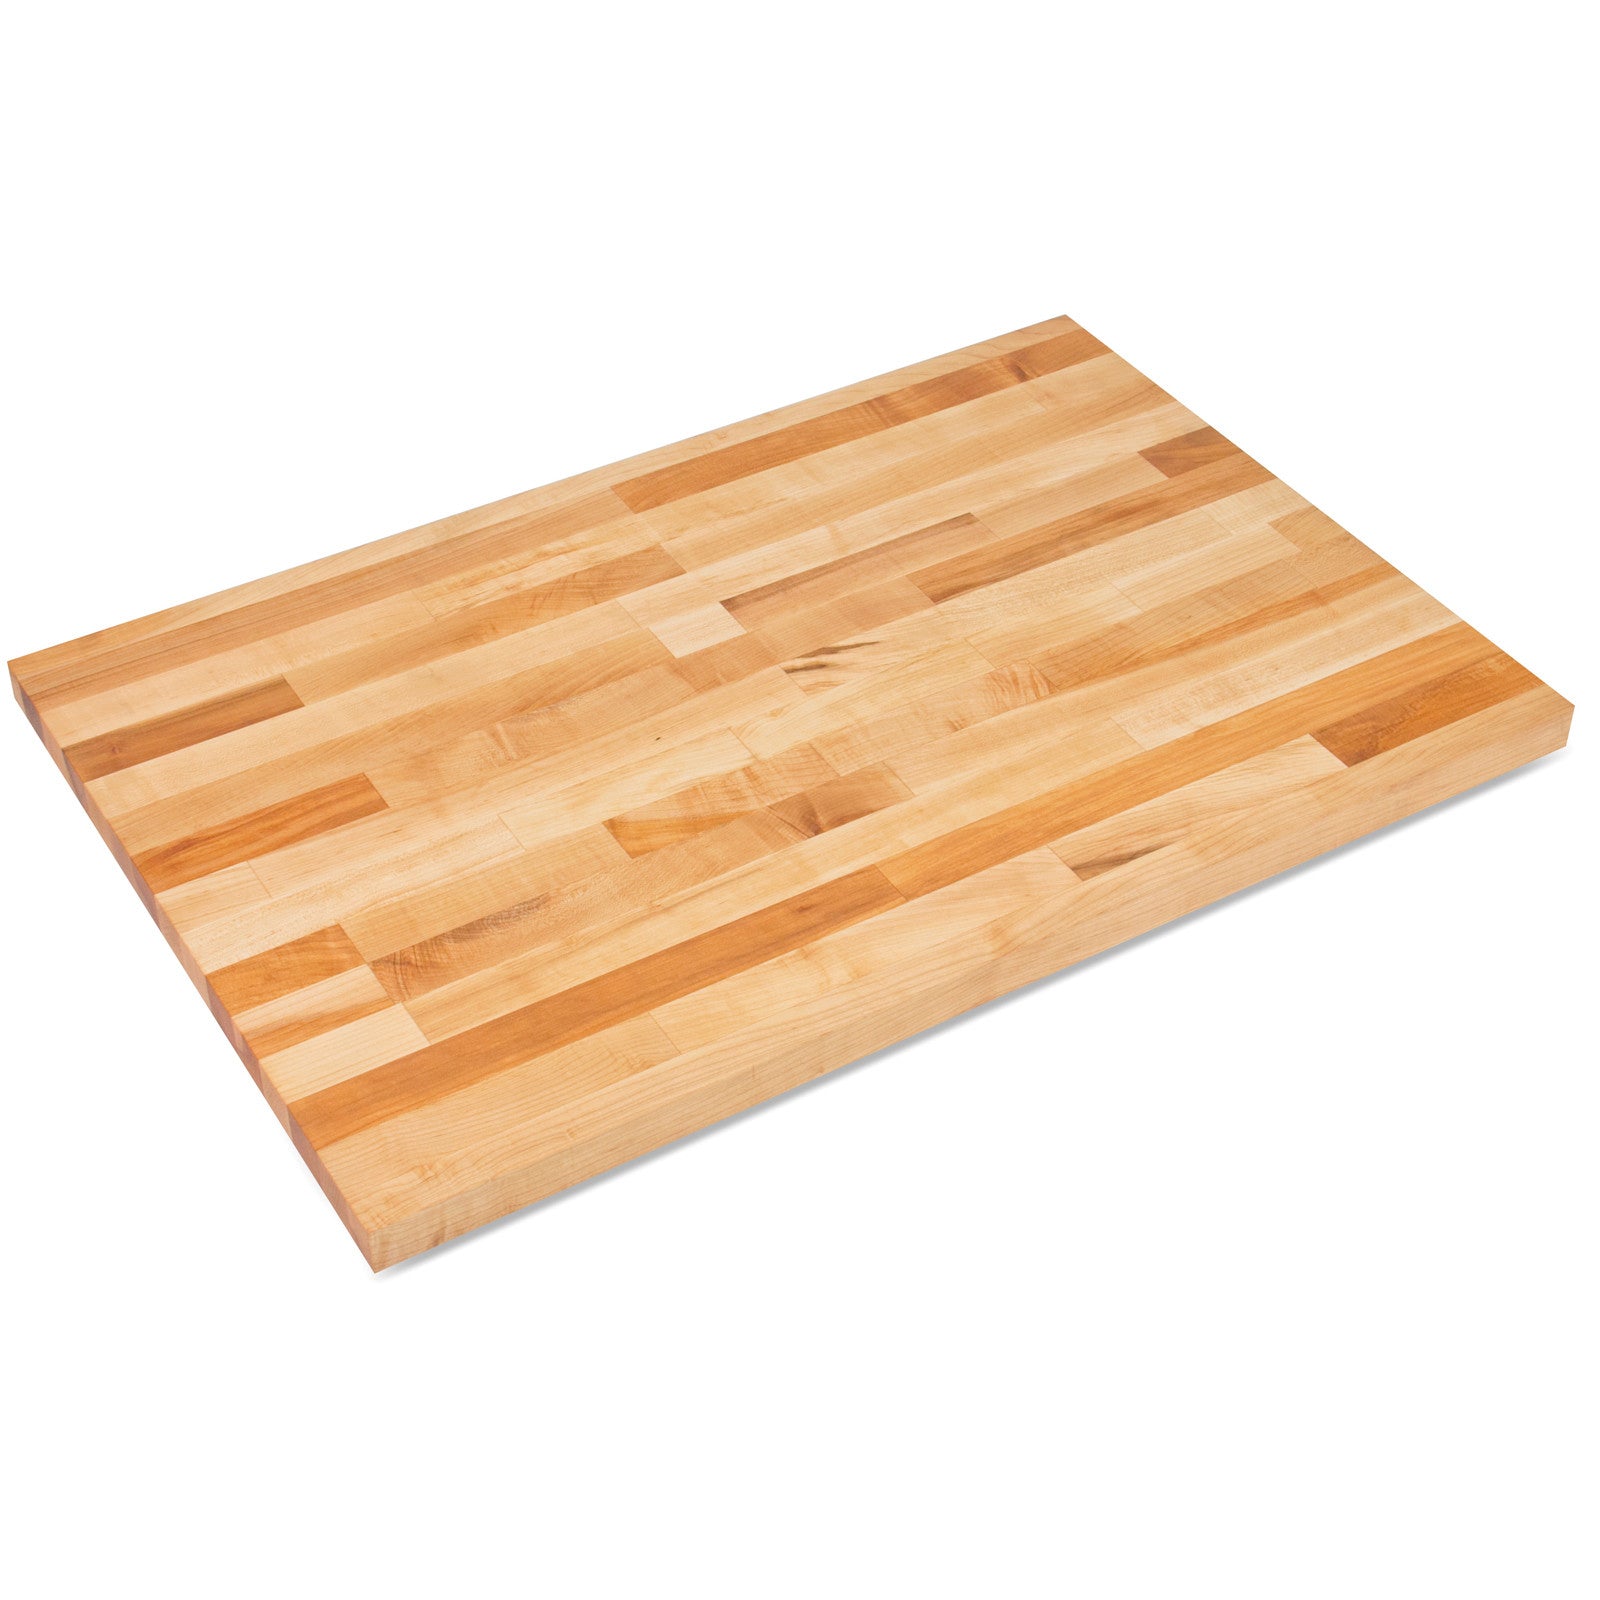 John Boos SC015-O Maple 1 3/4" Thick Replacement Top - 96 X 30 X 1.75